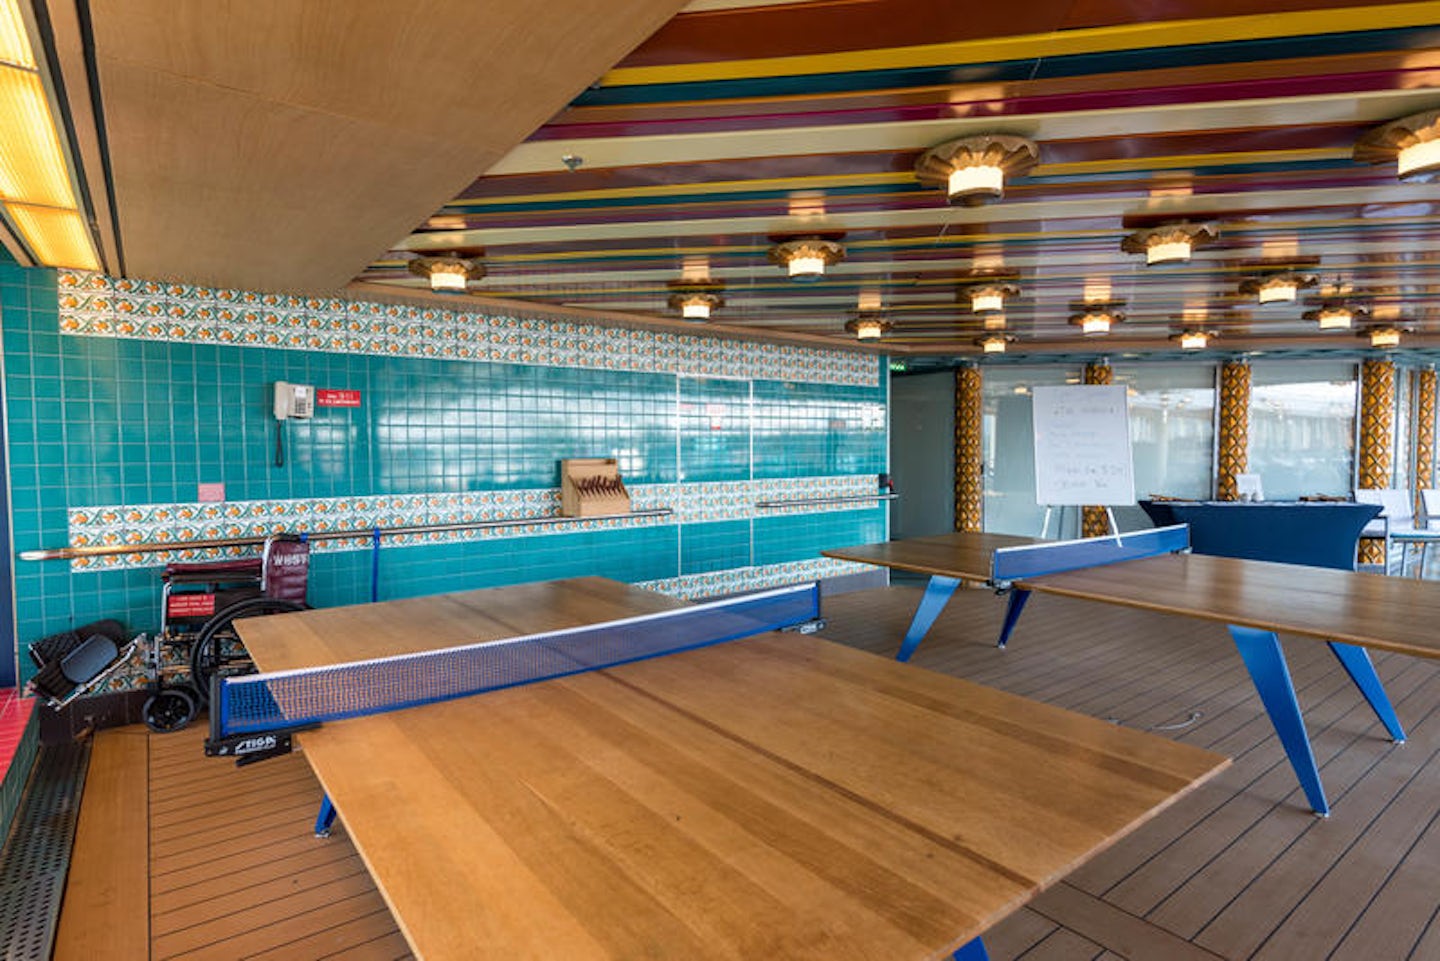 Table Tennis at the Lido Pool on Westerdam